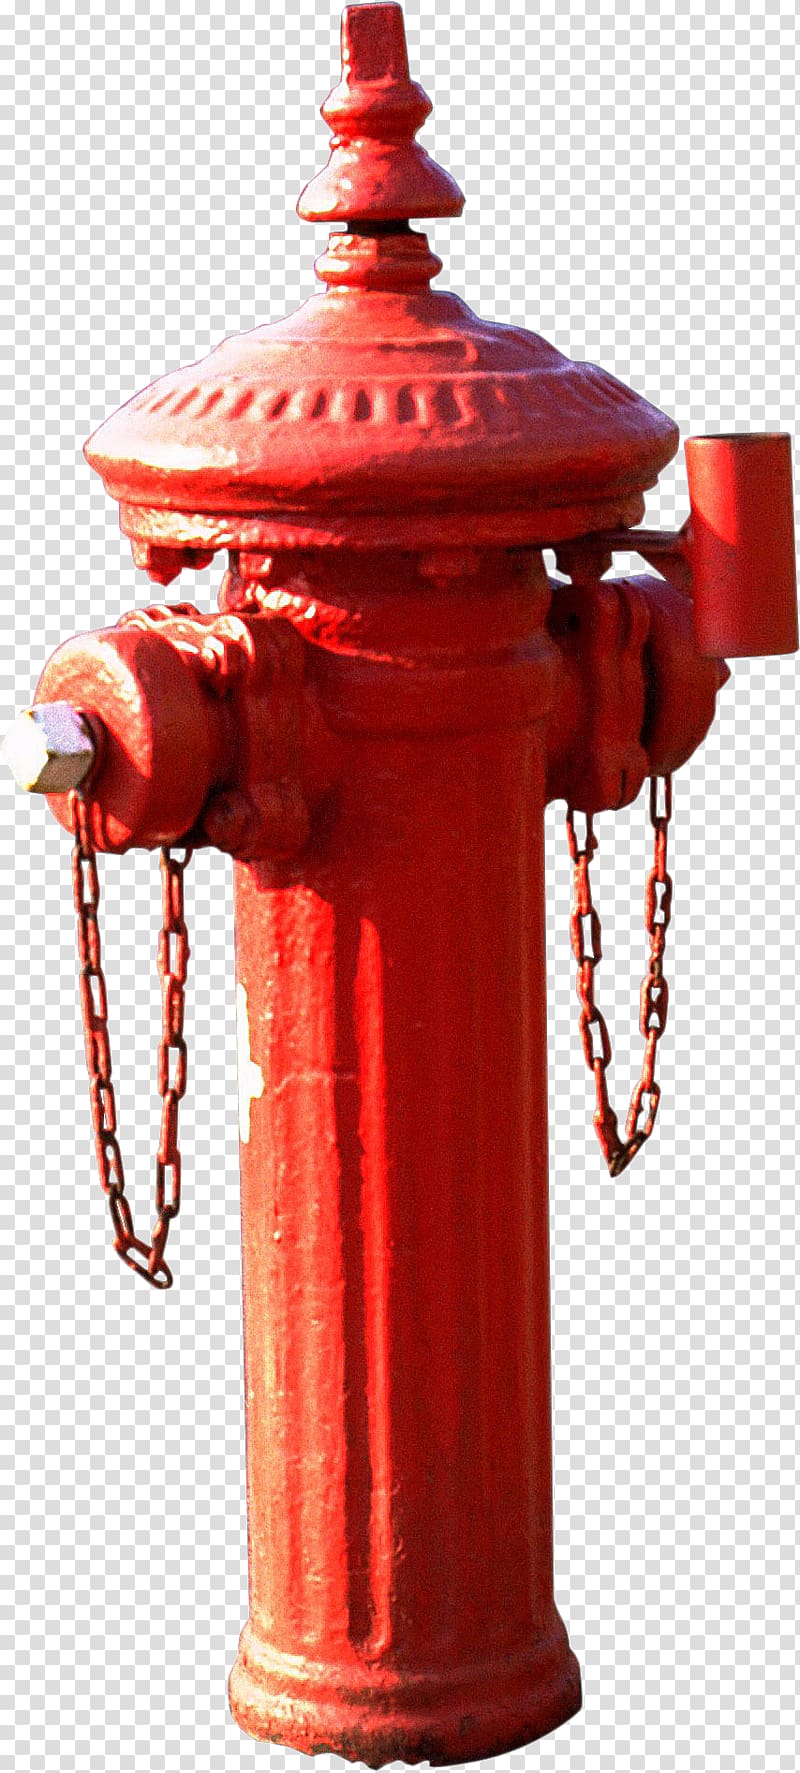 Fire hydrant transparent background PNG clipart